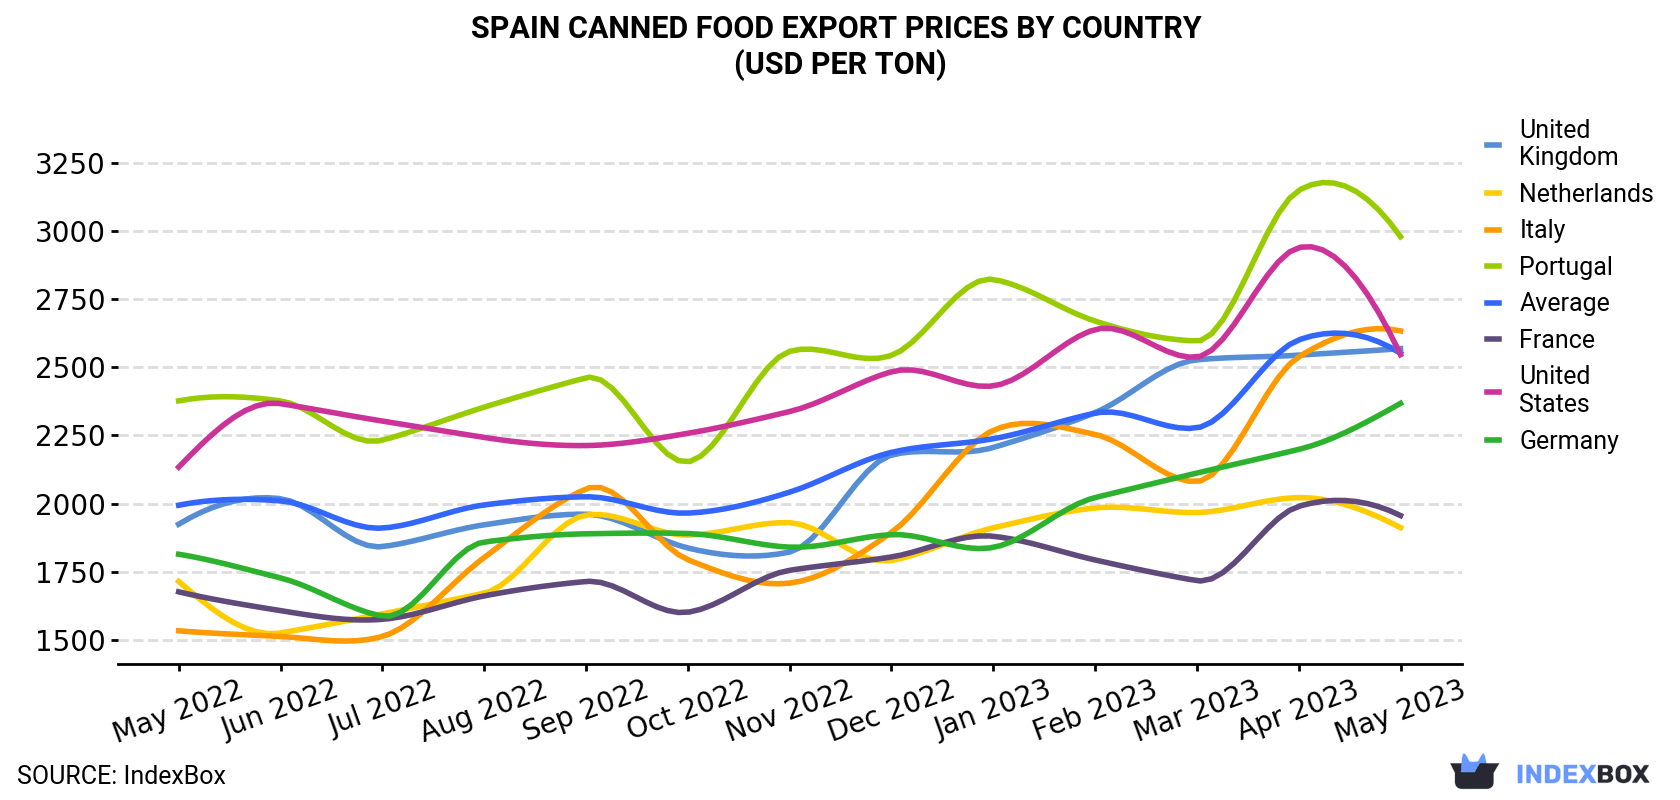 Spain Canned Food Export Prices By Country (USD Per Ton)